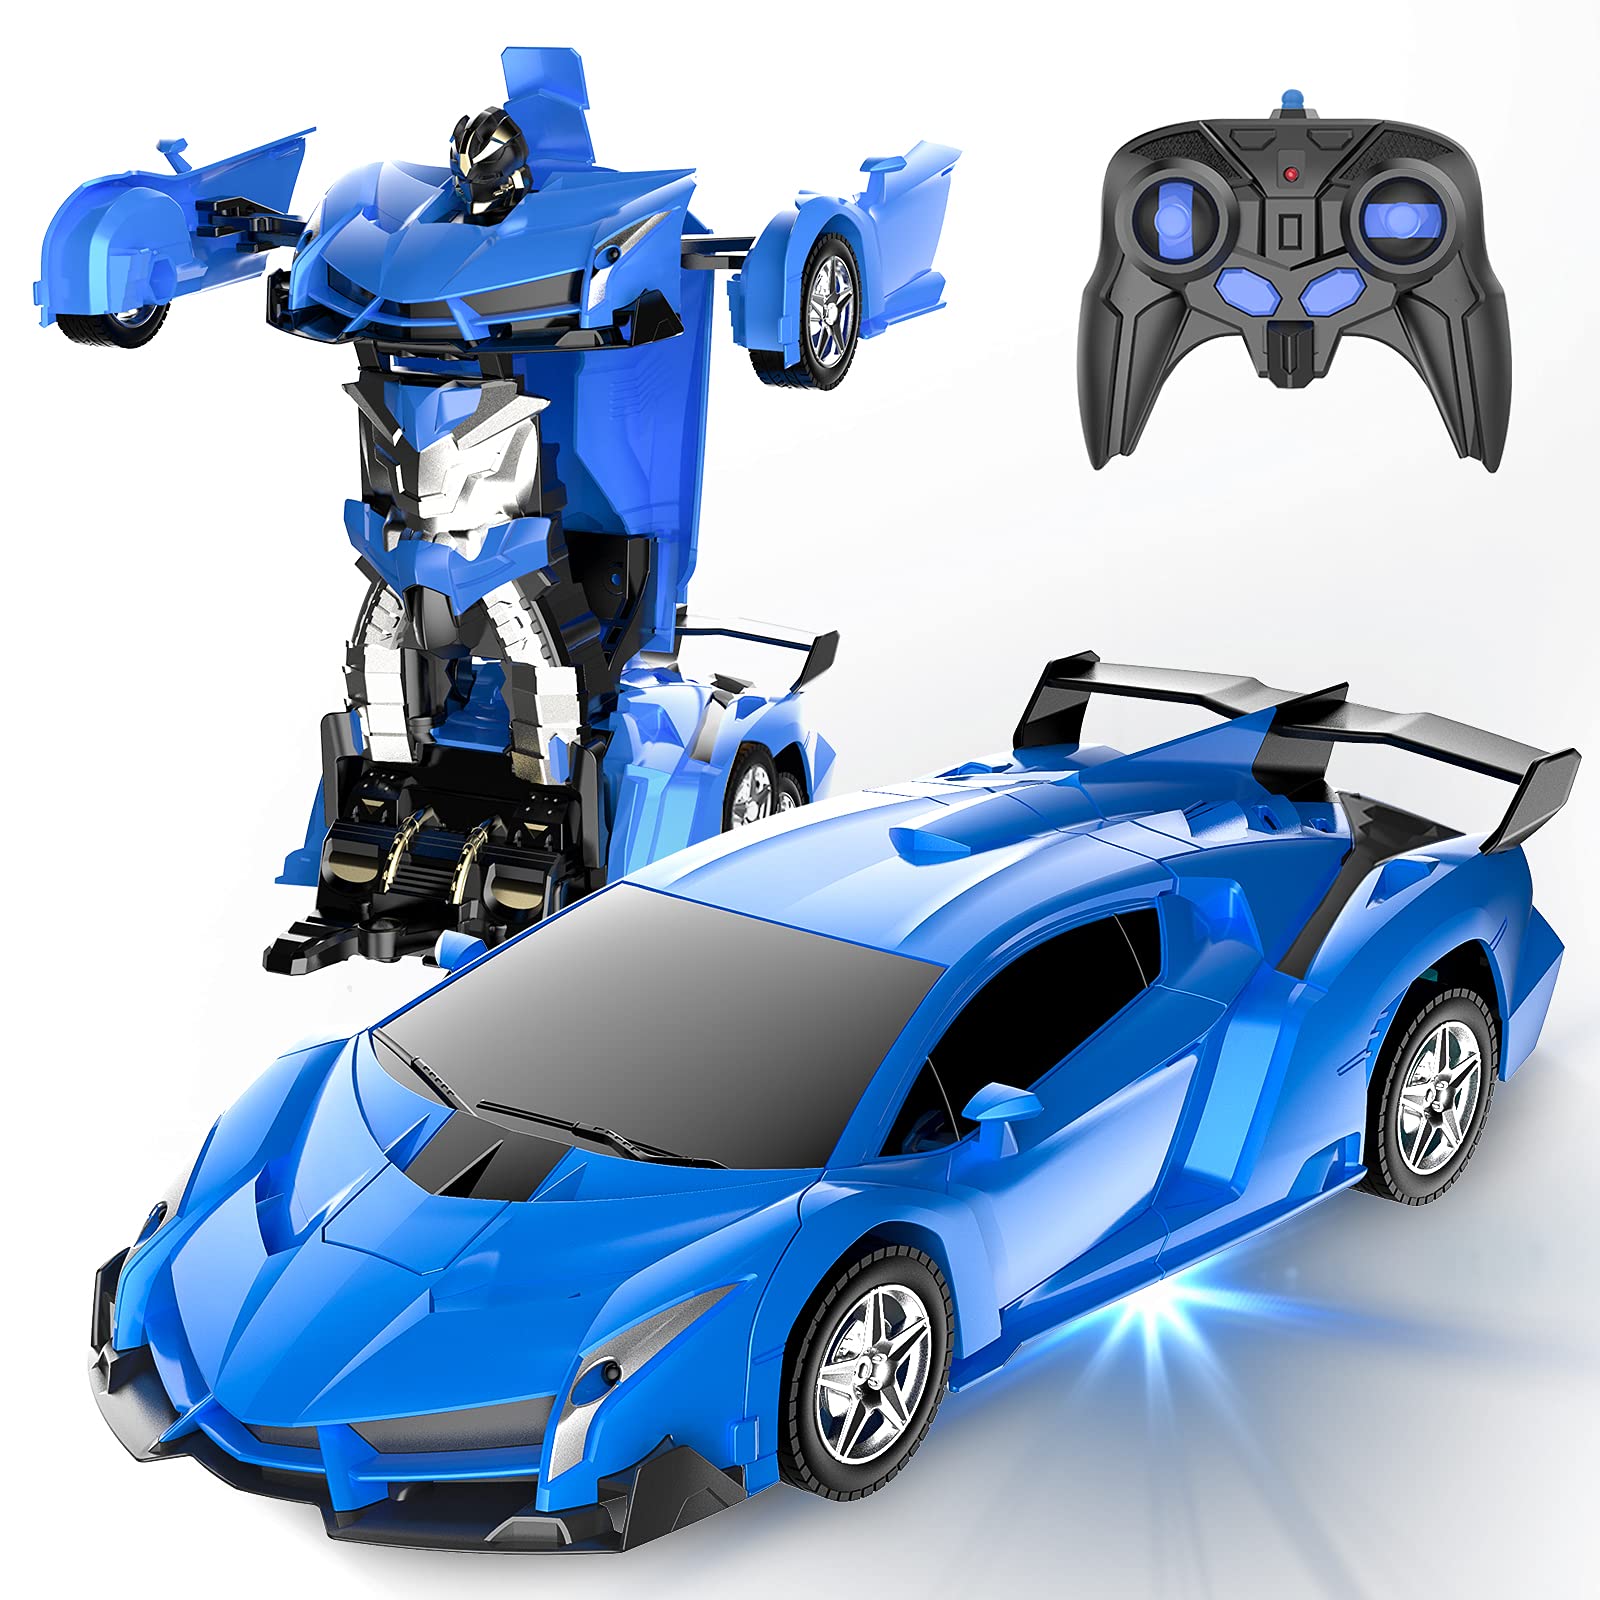 Desuccus Remote Control Car, Transform Robot RC Cars for Kids Toys, 2.4Ghz 1:18 Scale Racing Car with One-Button Deformation, 360°Drifting, Transforming Robot Car Toy for Boys Girls